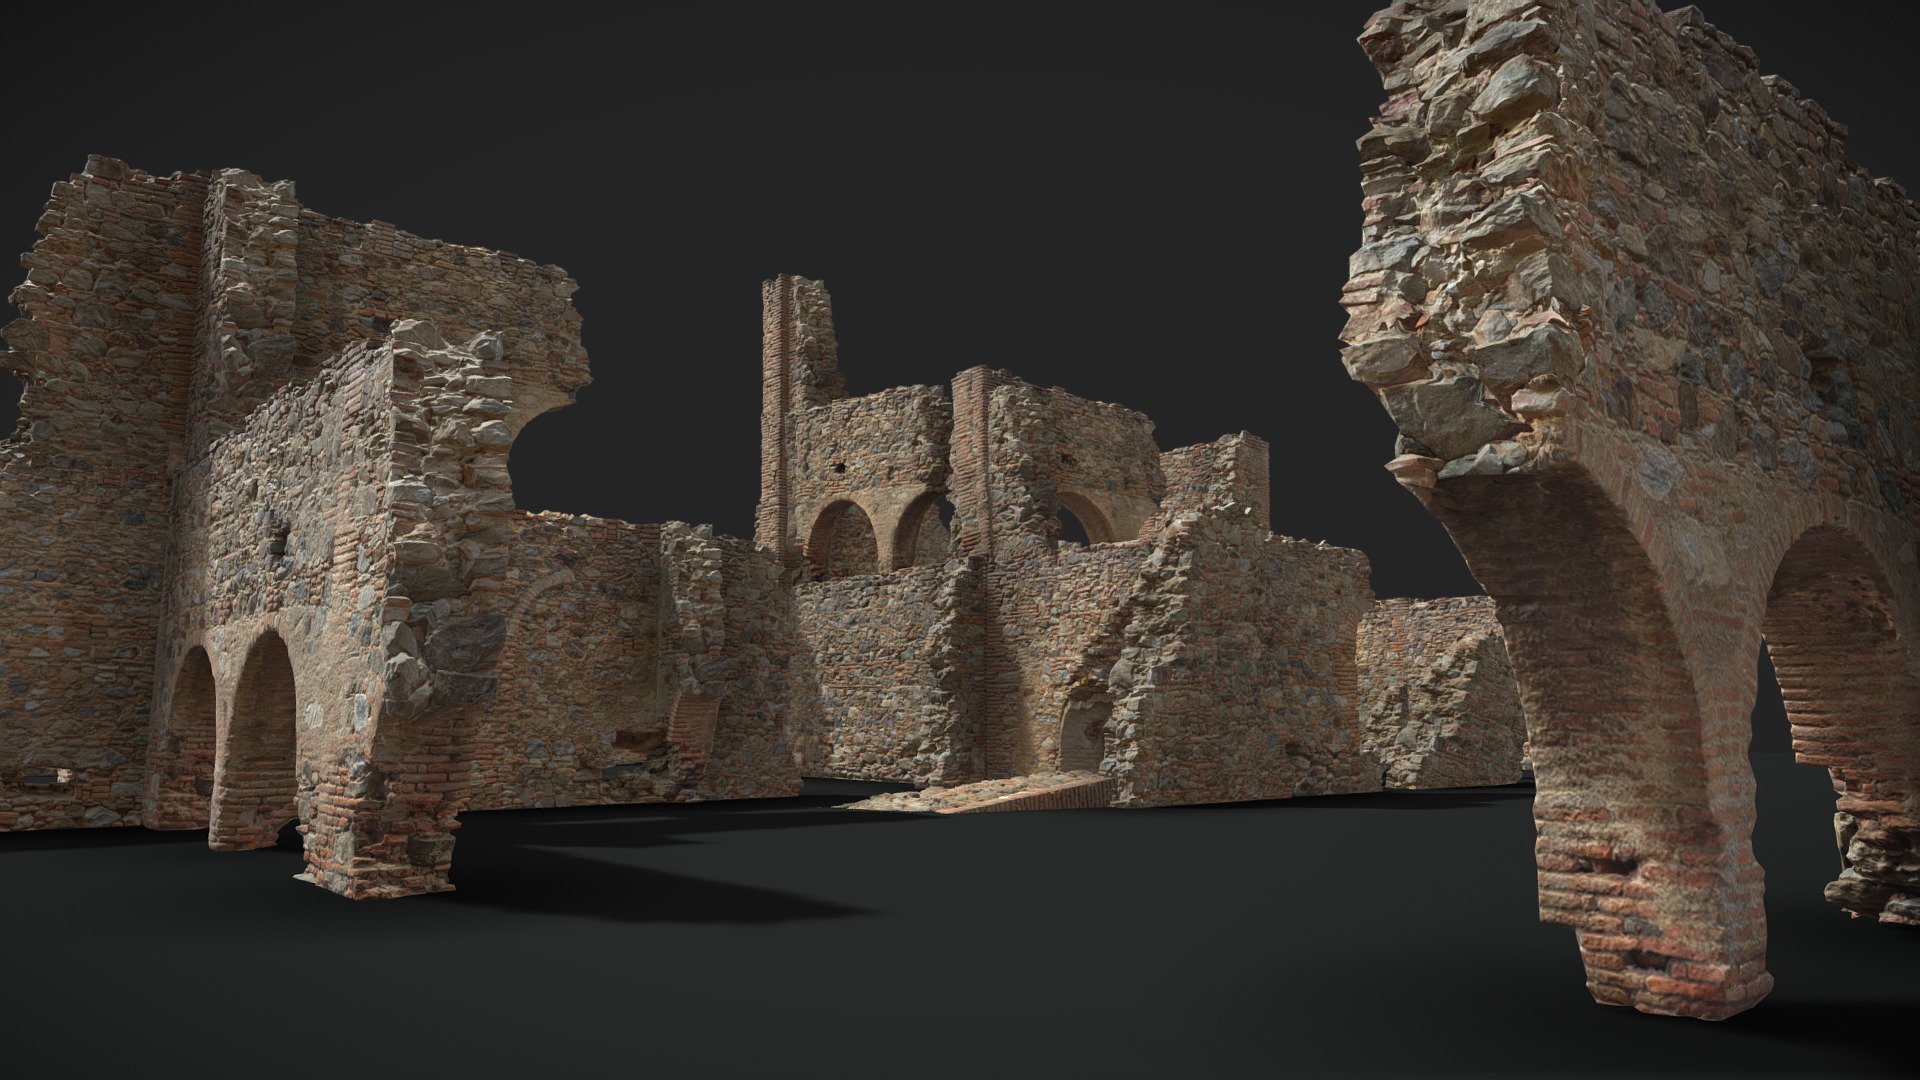 Captured in neutral lighting conditions. Feel free to rotate the lights.

These bigger modules are also an example what you can create with his set:
https://sketchfab.com/3d-models/modular-brick-ruins-pbr-scans-baab5d6fc1664454b3bc518bad3e8859

Brick ruins with two 8K PBR materials: 




Albedo

Normal

Roughness

Displacement

Rendered in Cycles with displacement + adaptive subdivions + vegetation:


Additional Files contain:




blender source file + packed textures

.fbx

.obj

textures 8k

Please let me know if something is not working as it should 3d model